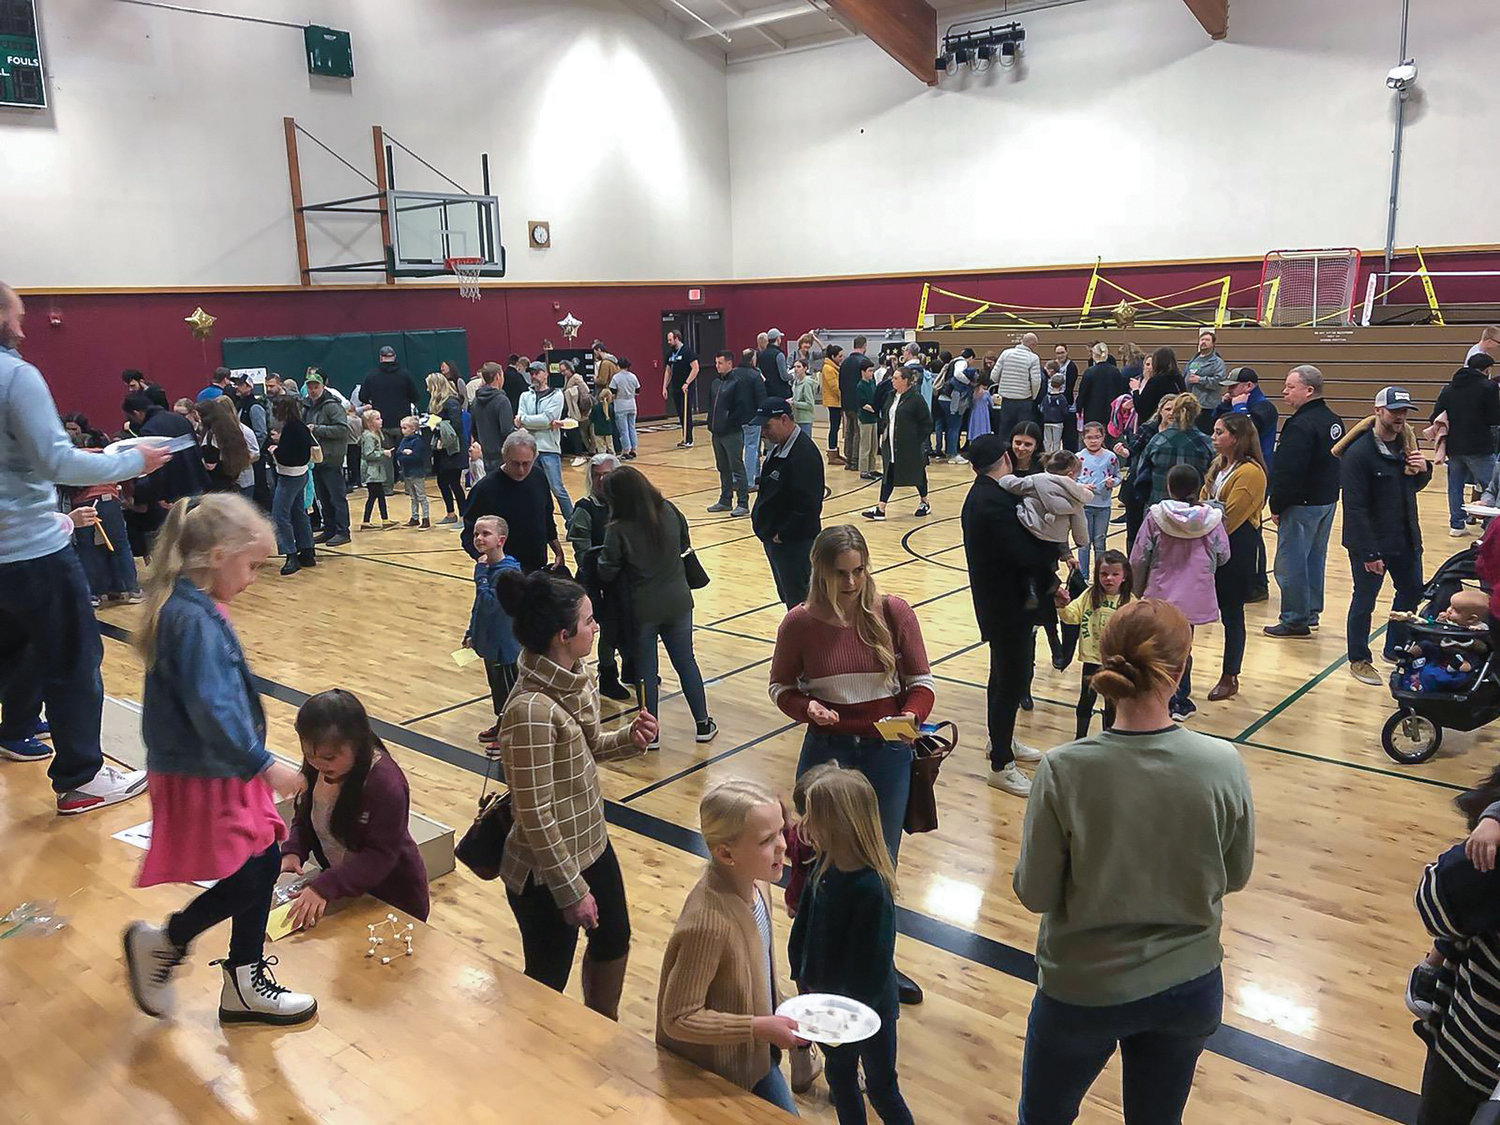 Around 225 students and their families participated in Firm Foundation Christian School’s STEAM night on Friday, Jan. 27.